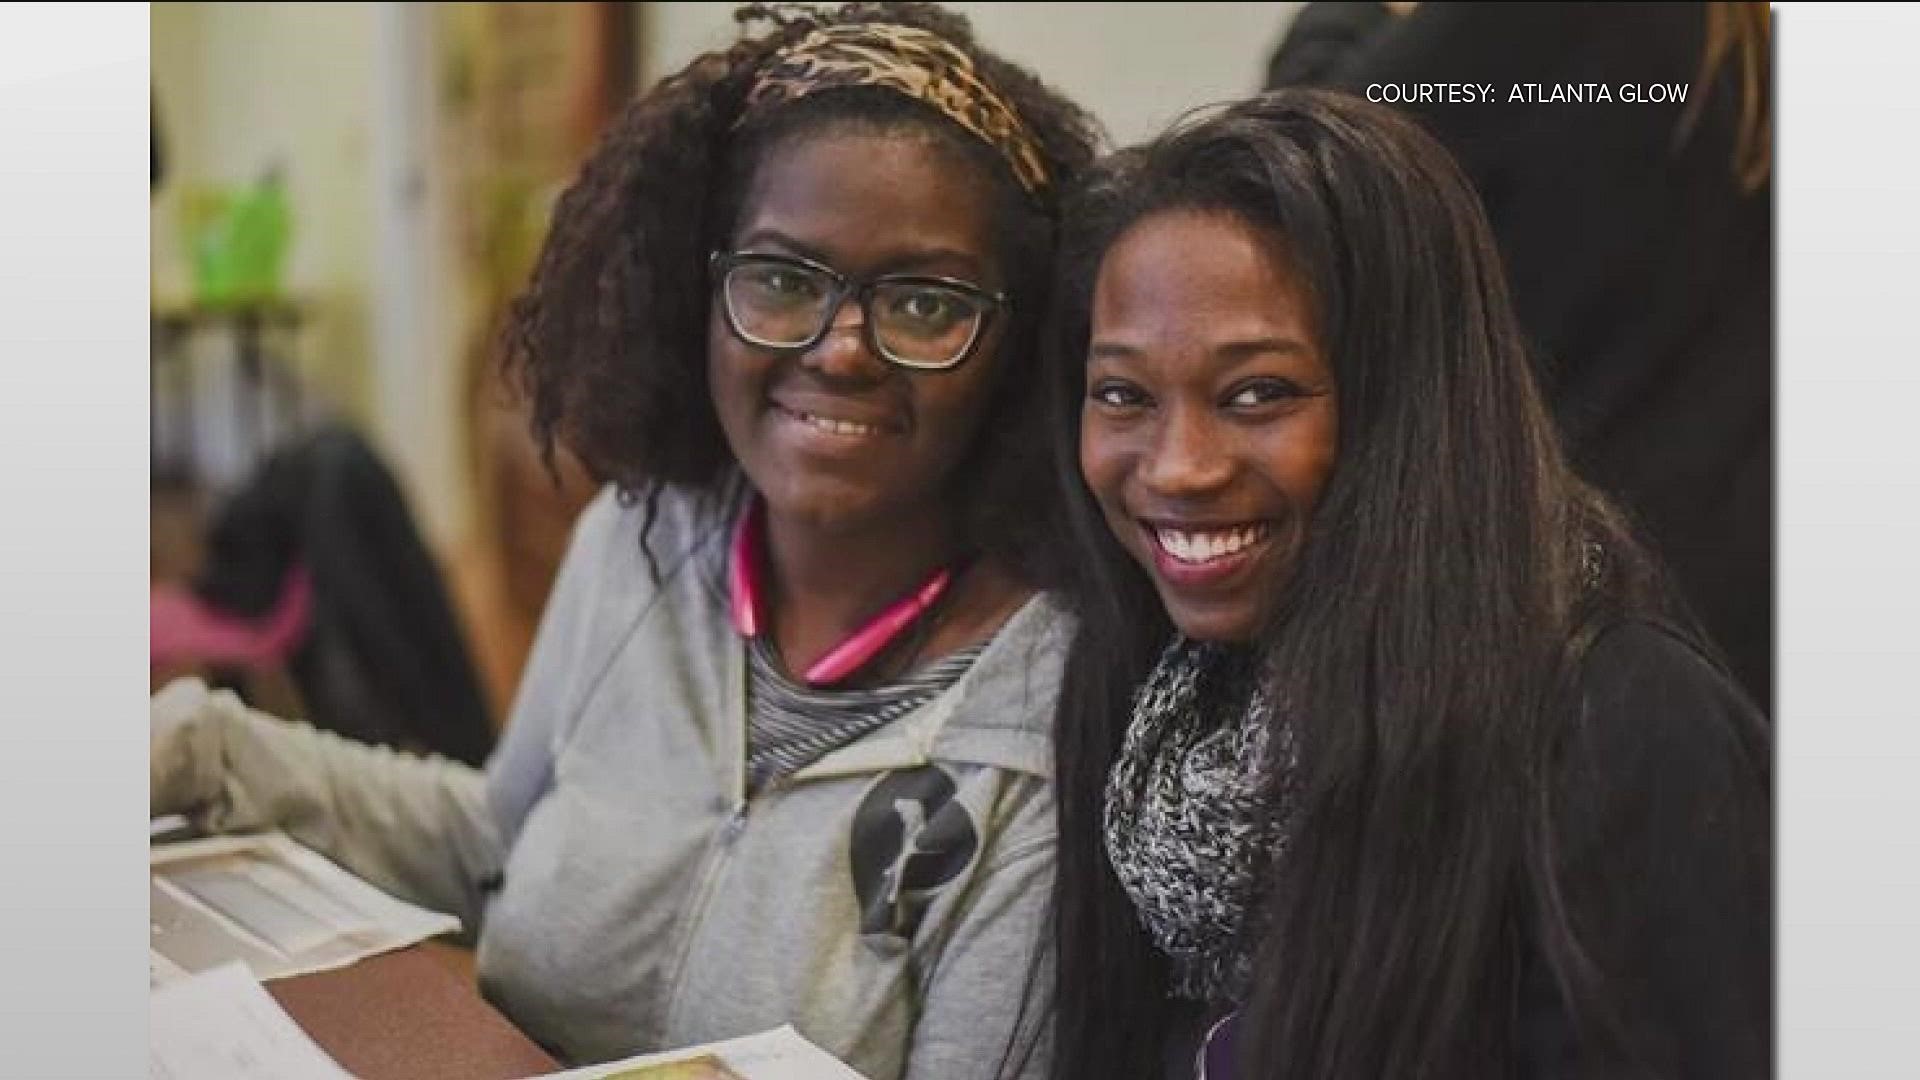 One Black-owned non-profit is helping empower women to succeed.